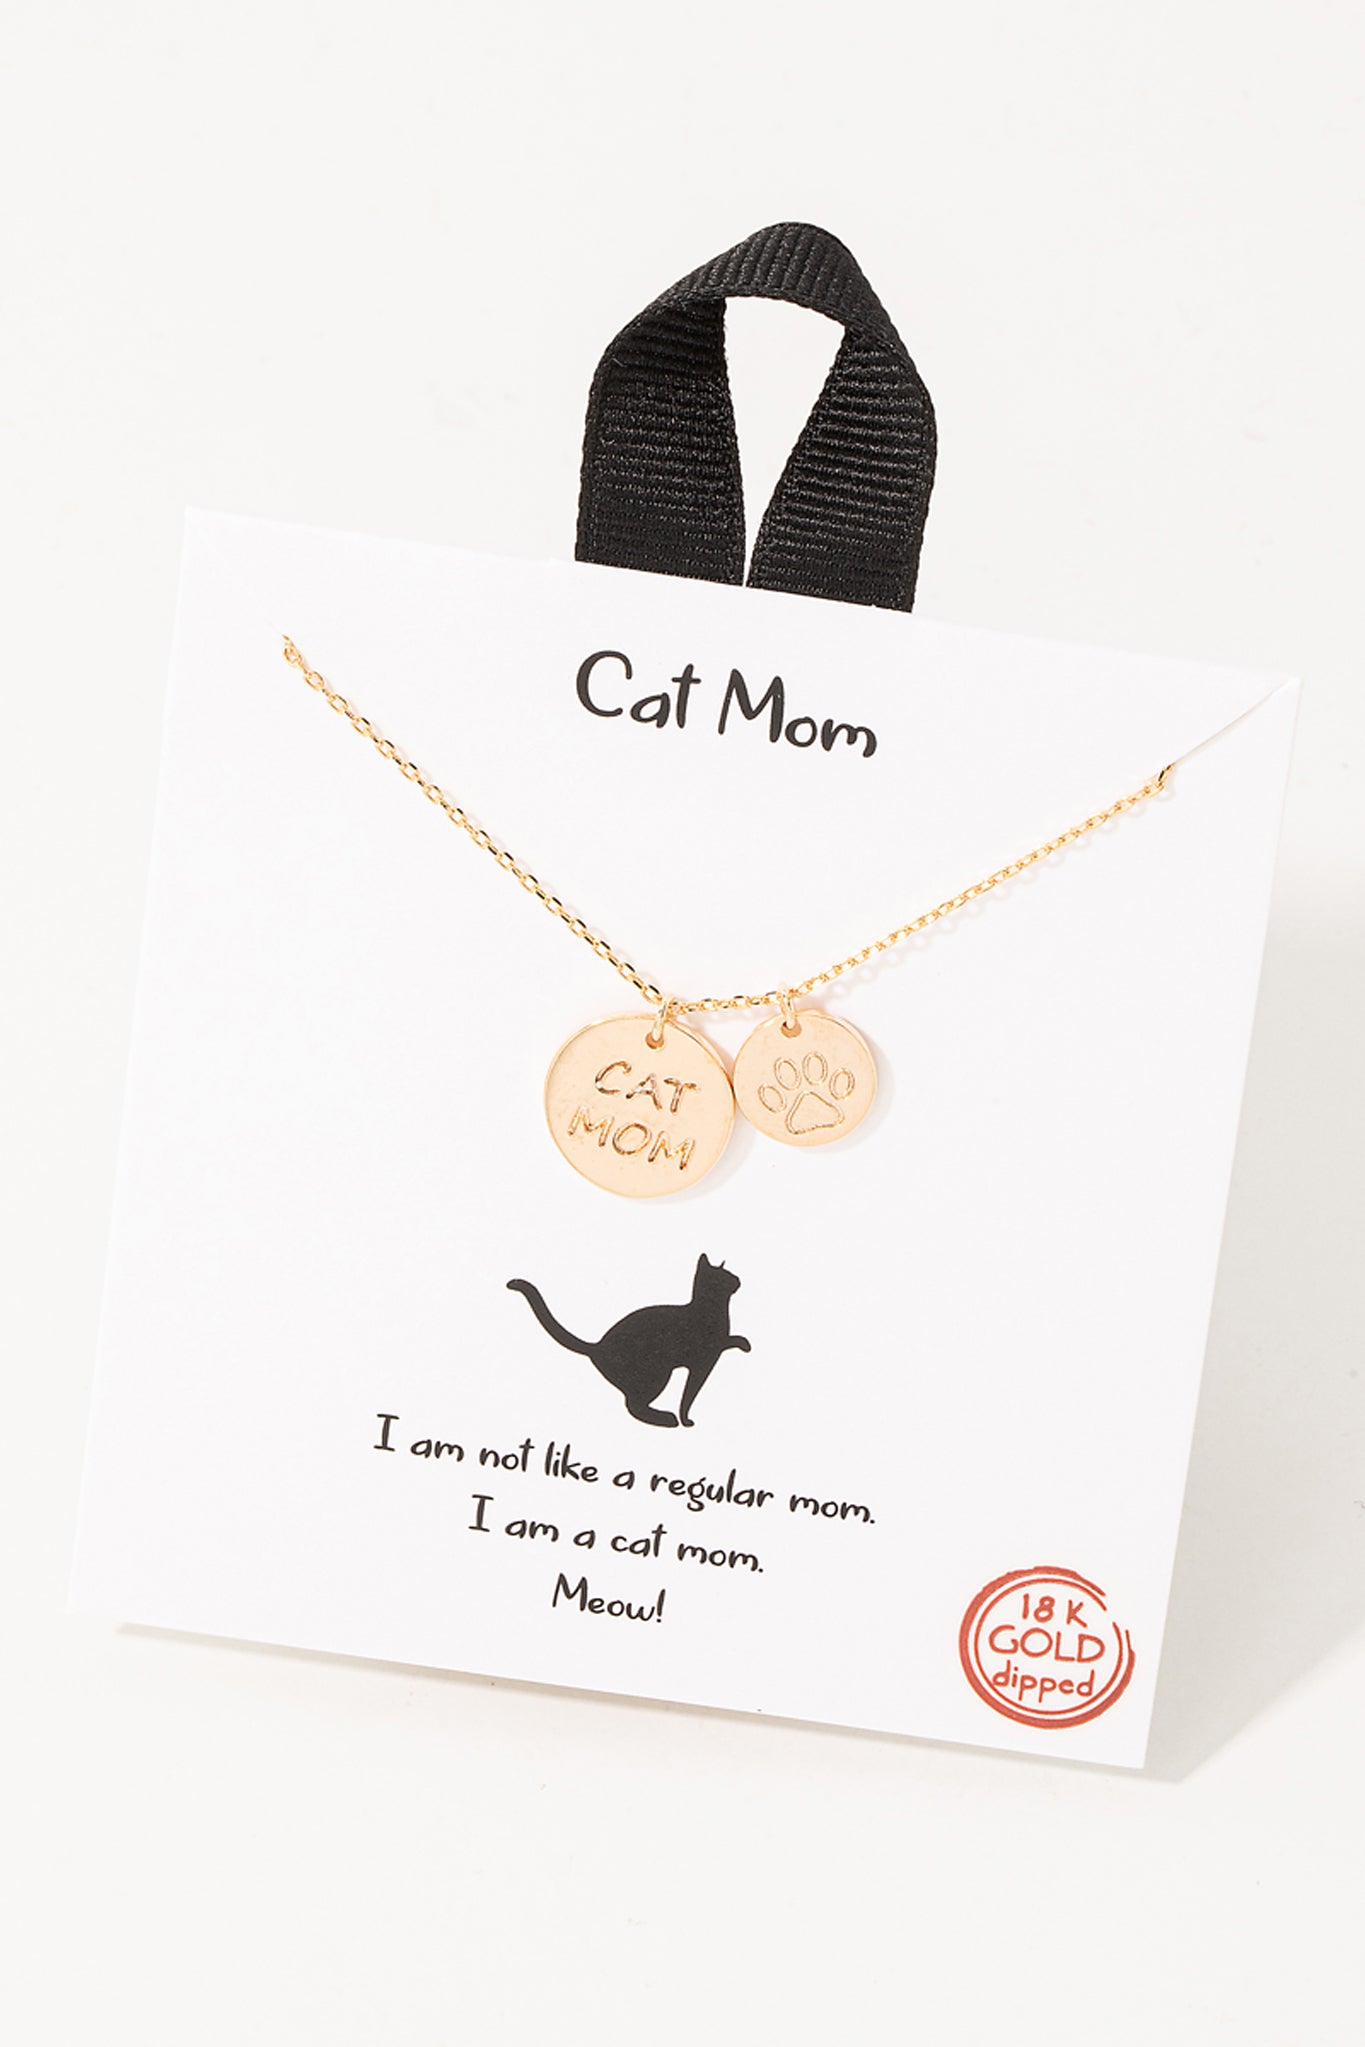 View 1 of Cat Mom Coin Charm Necklace, a Necklace from Larrea Cove. Detail: This stunning Cat Mom...